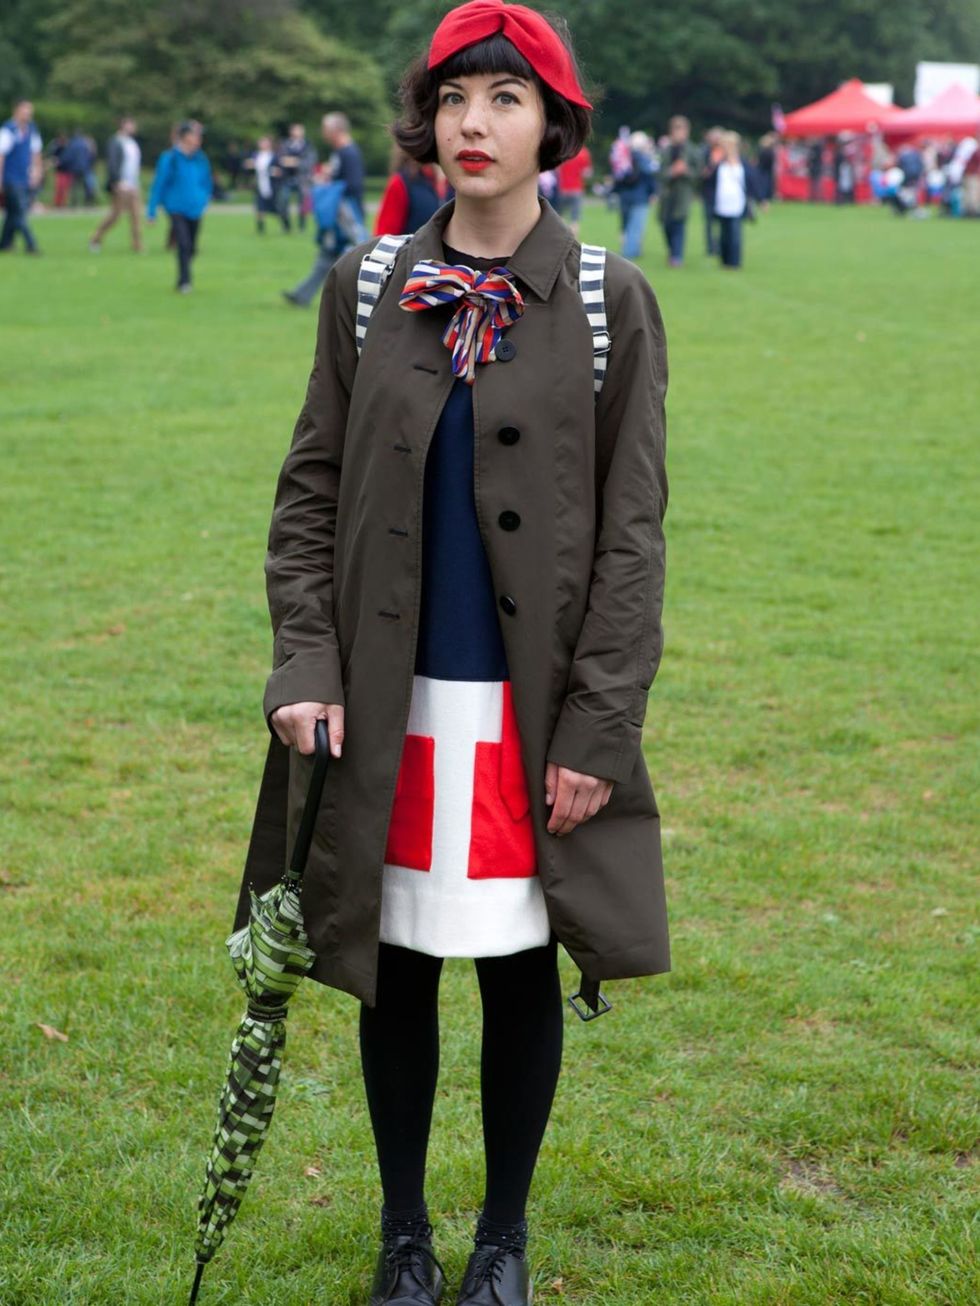 <p>Tilly Hemmingway, 24, Designer. Coat by Aquascutum, dress, bag and scarf all vintage, boots Dr Martens.</p><p>Photo by Rick Kelly</p>